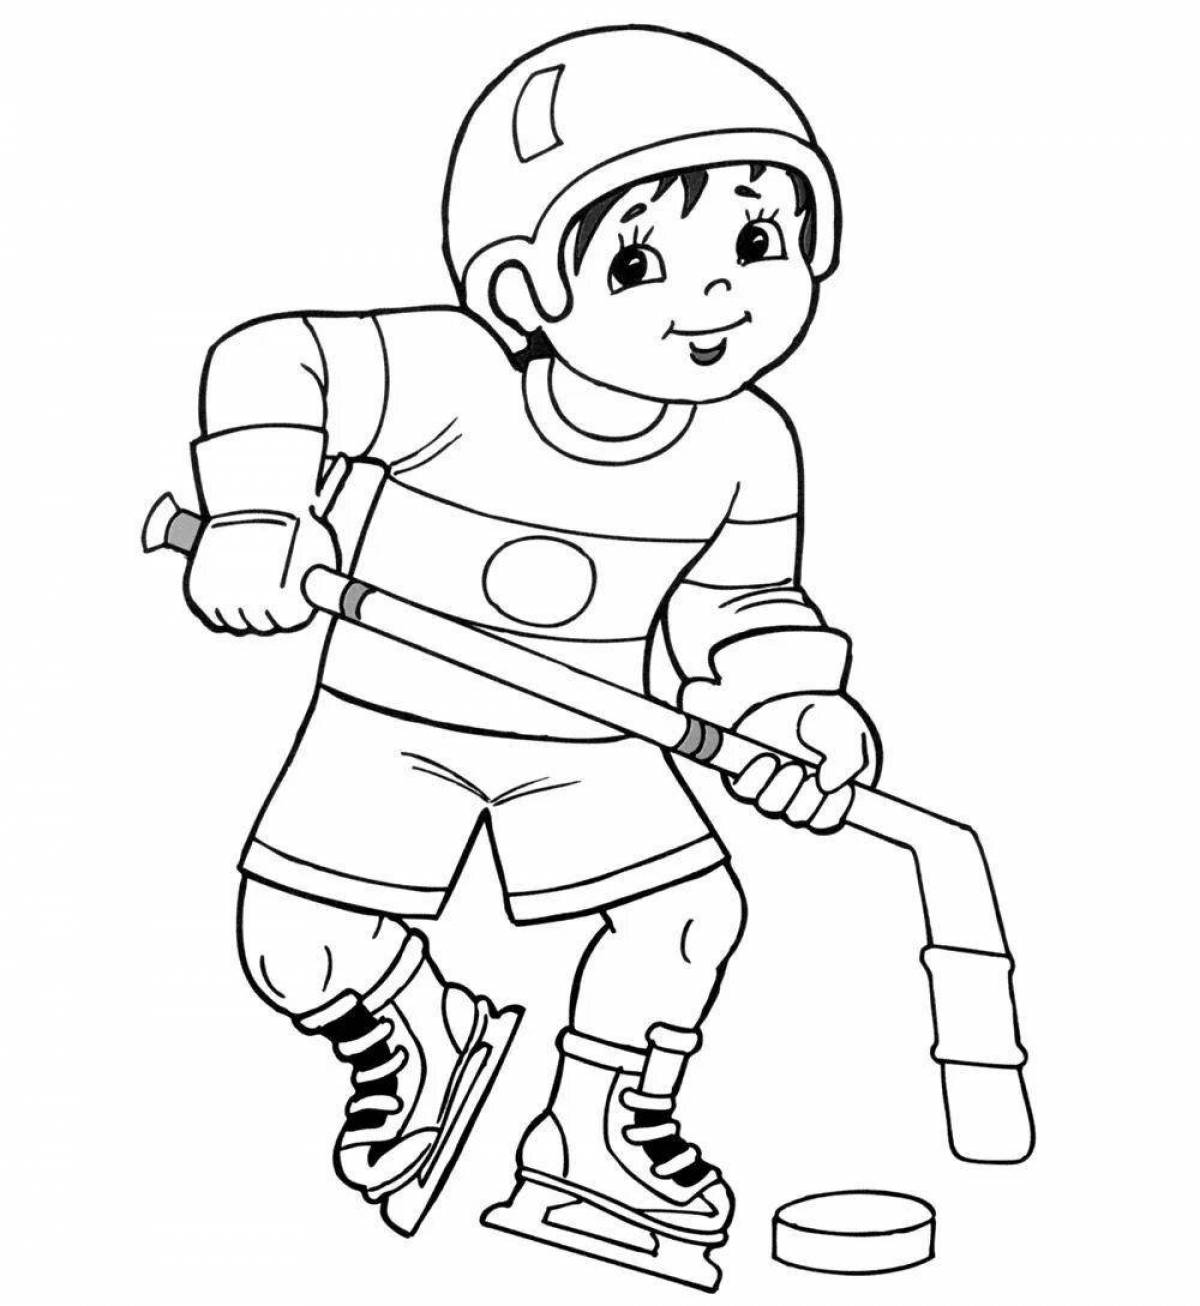 Flourishing winter sports coloring page